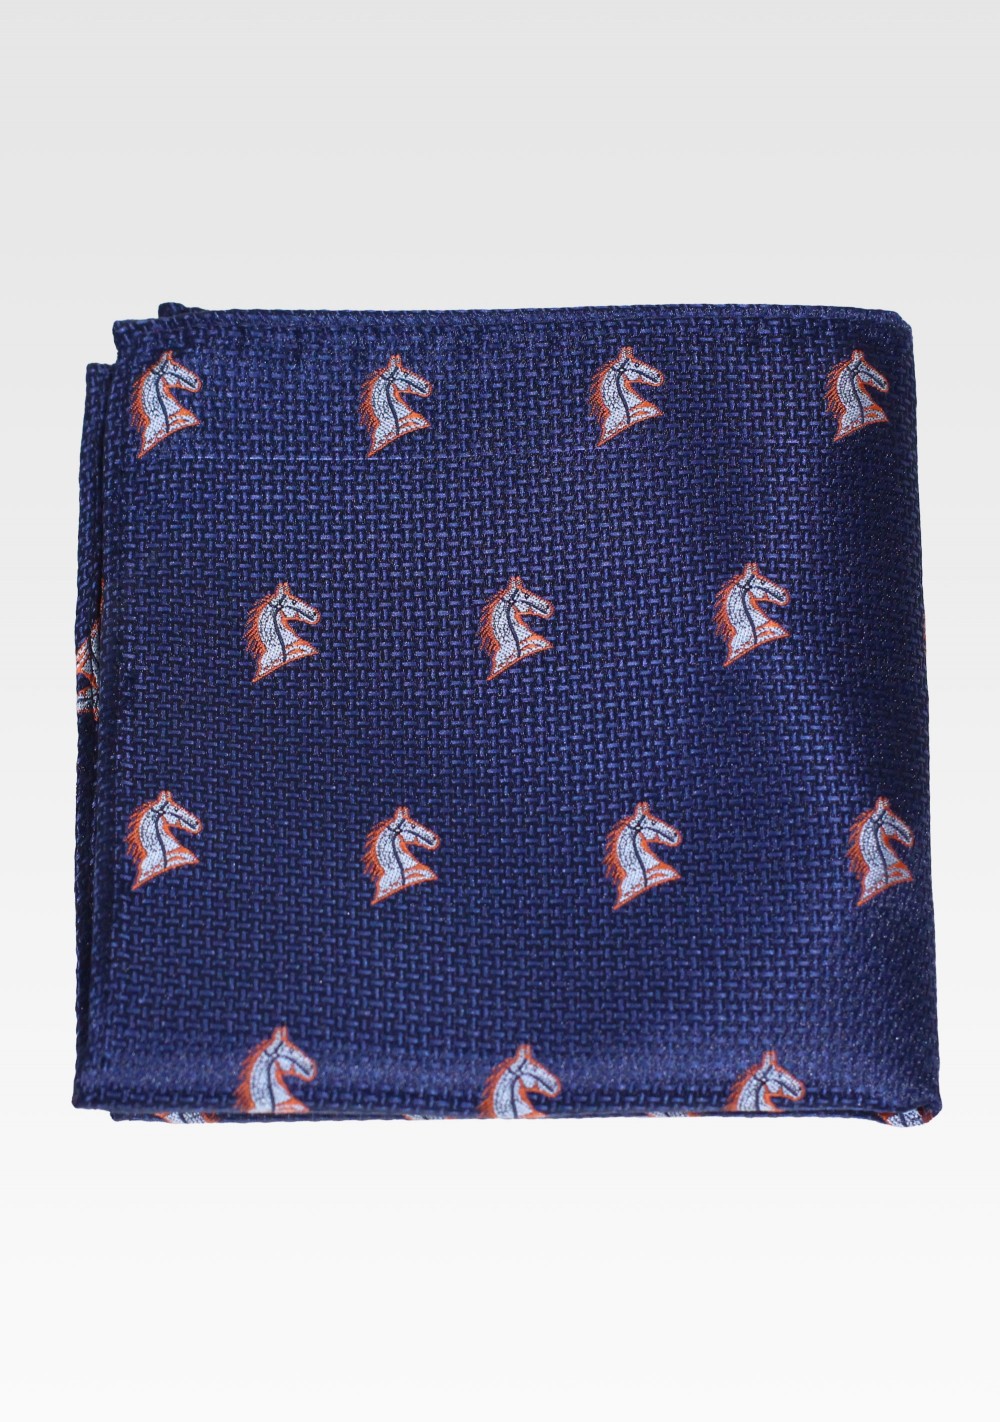 Navy Hanky with Embroidered Horses